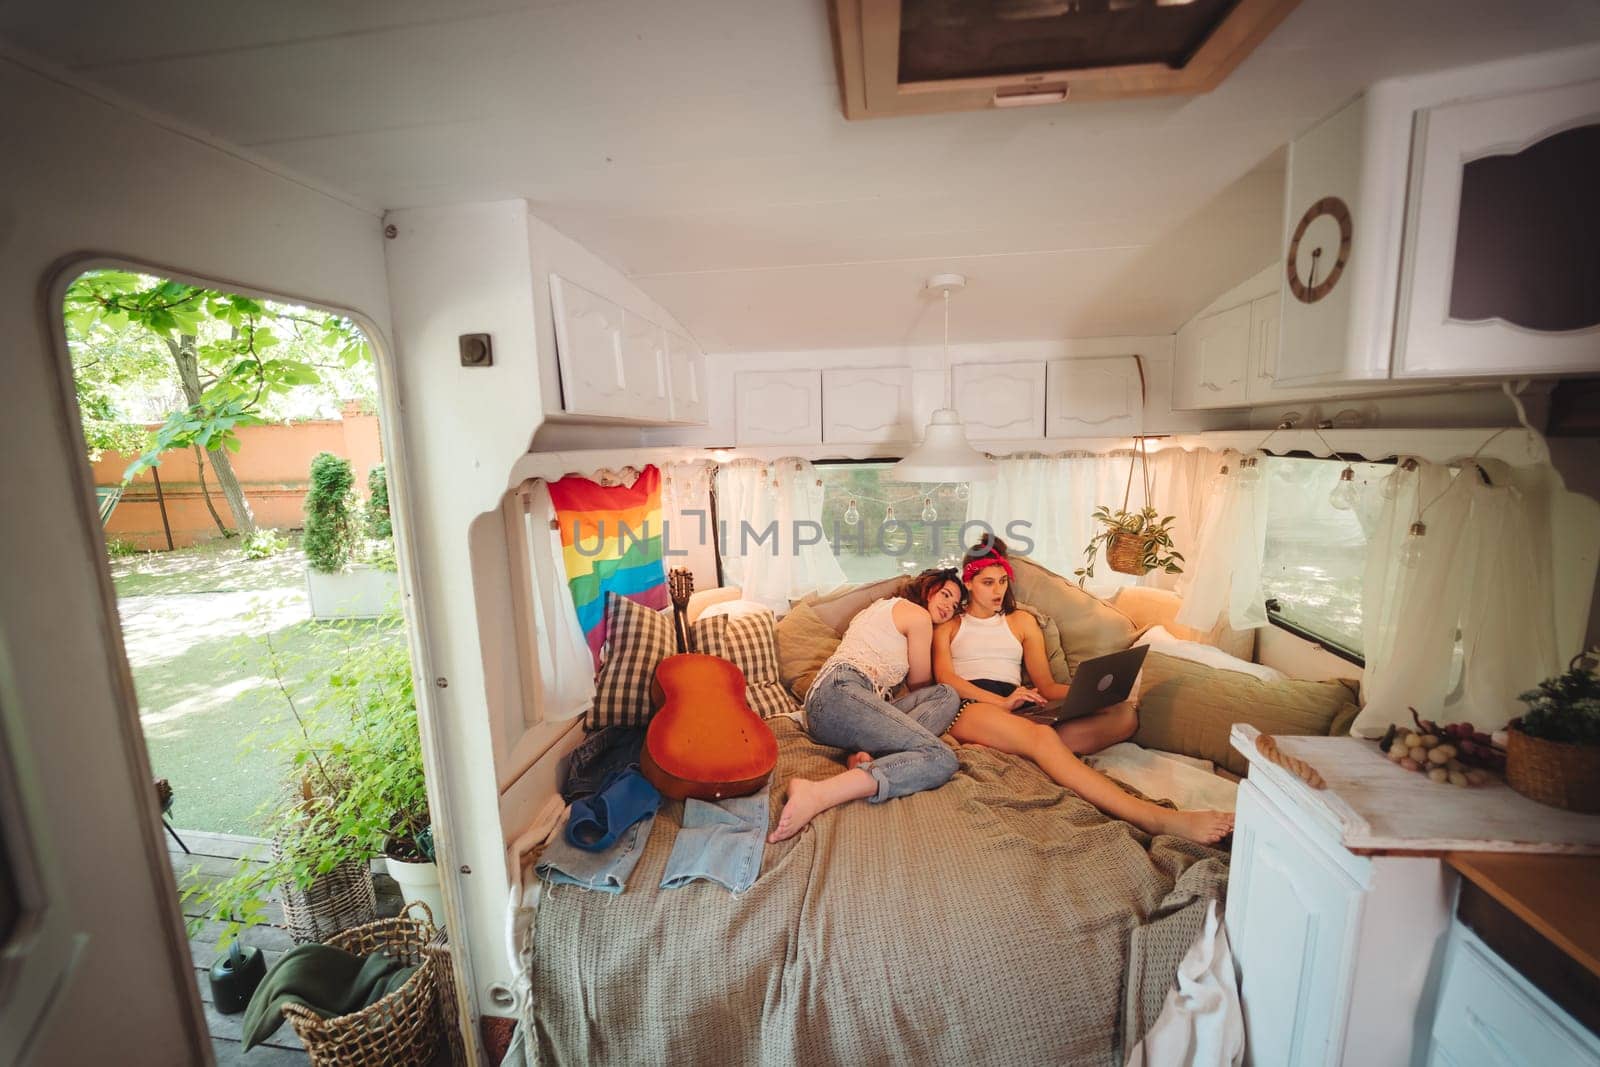 Portrait of a cute lesbian couple. Two girls spend time tenderly together watching movie on laptop in a camper trailer with LGBT flag on the wall. Love and attitude. LGBT concept. High quality photo